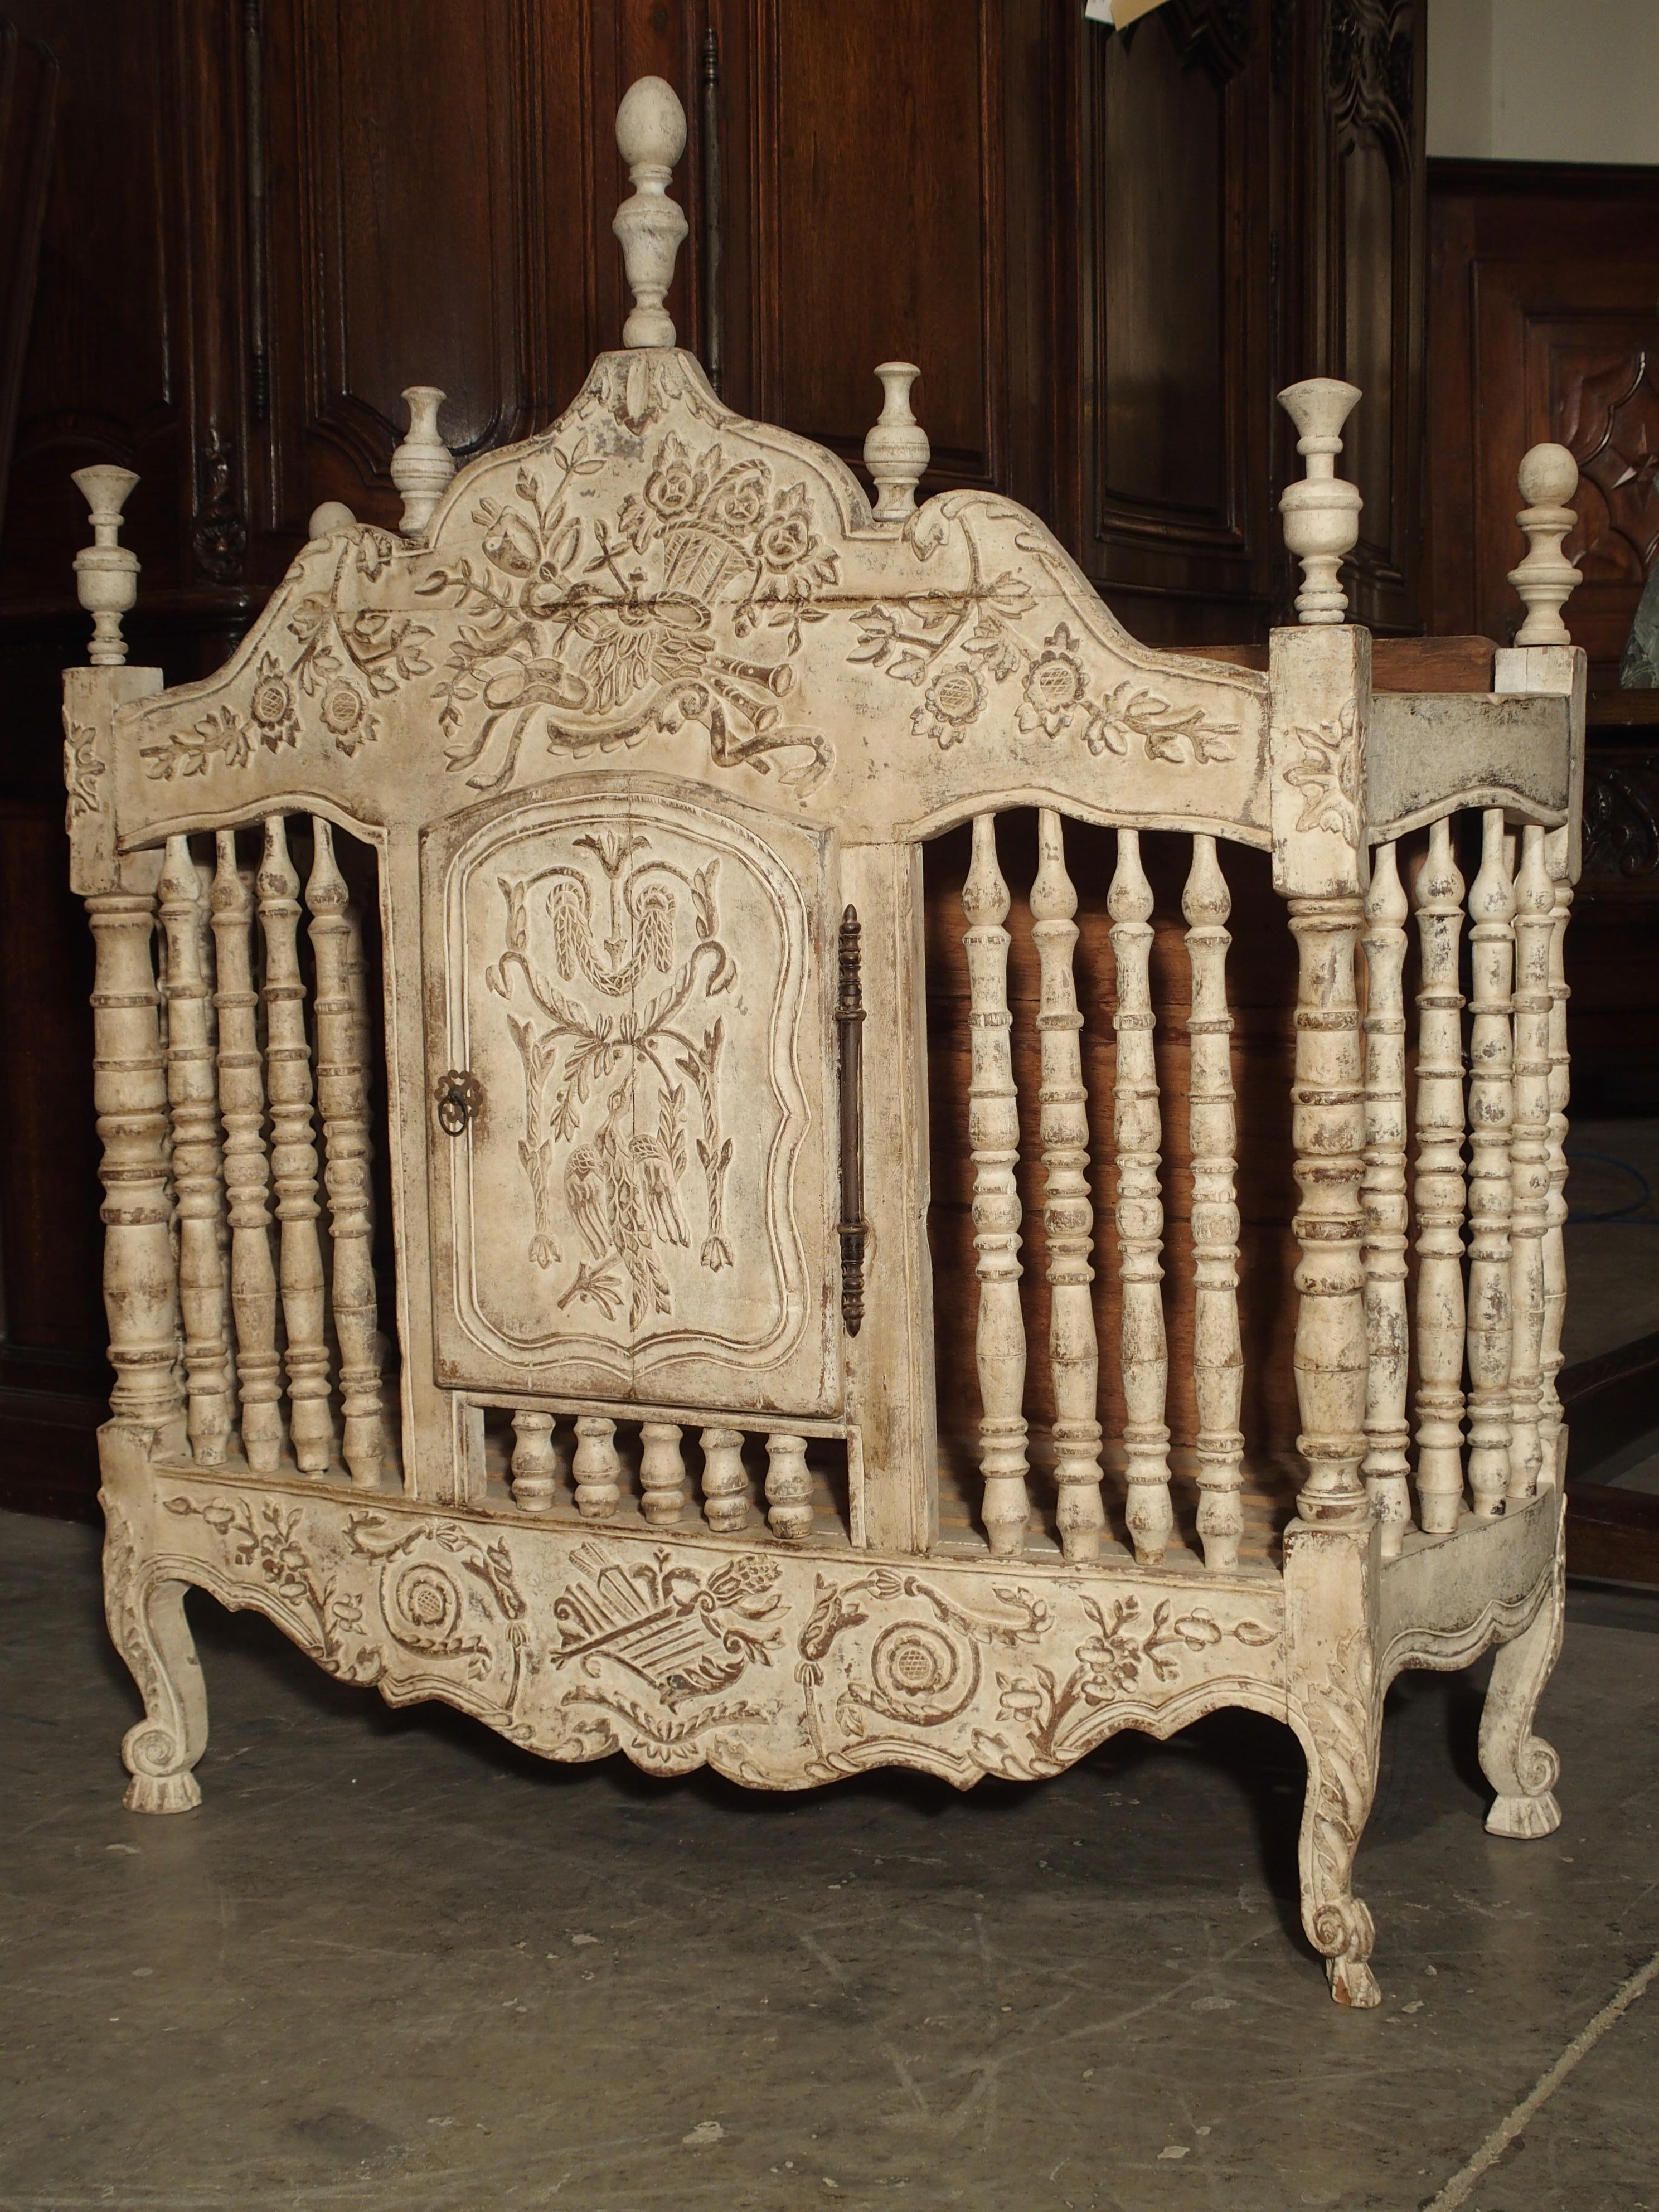 This antique French, painted panetiere is from Provence, France. Multiple motifs of various flowers, musical instruments, C-and S-Scrolls, baskets, ribbons and acanthus leaf detail are on the frieze, the door, and the apron. Turned spindles are on